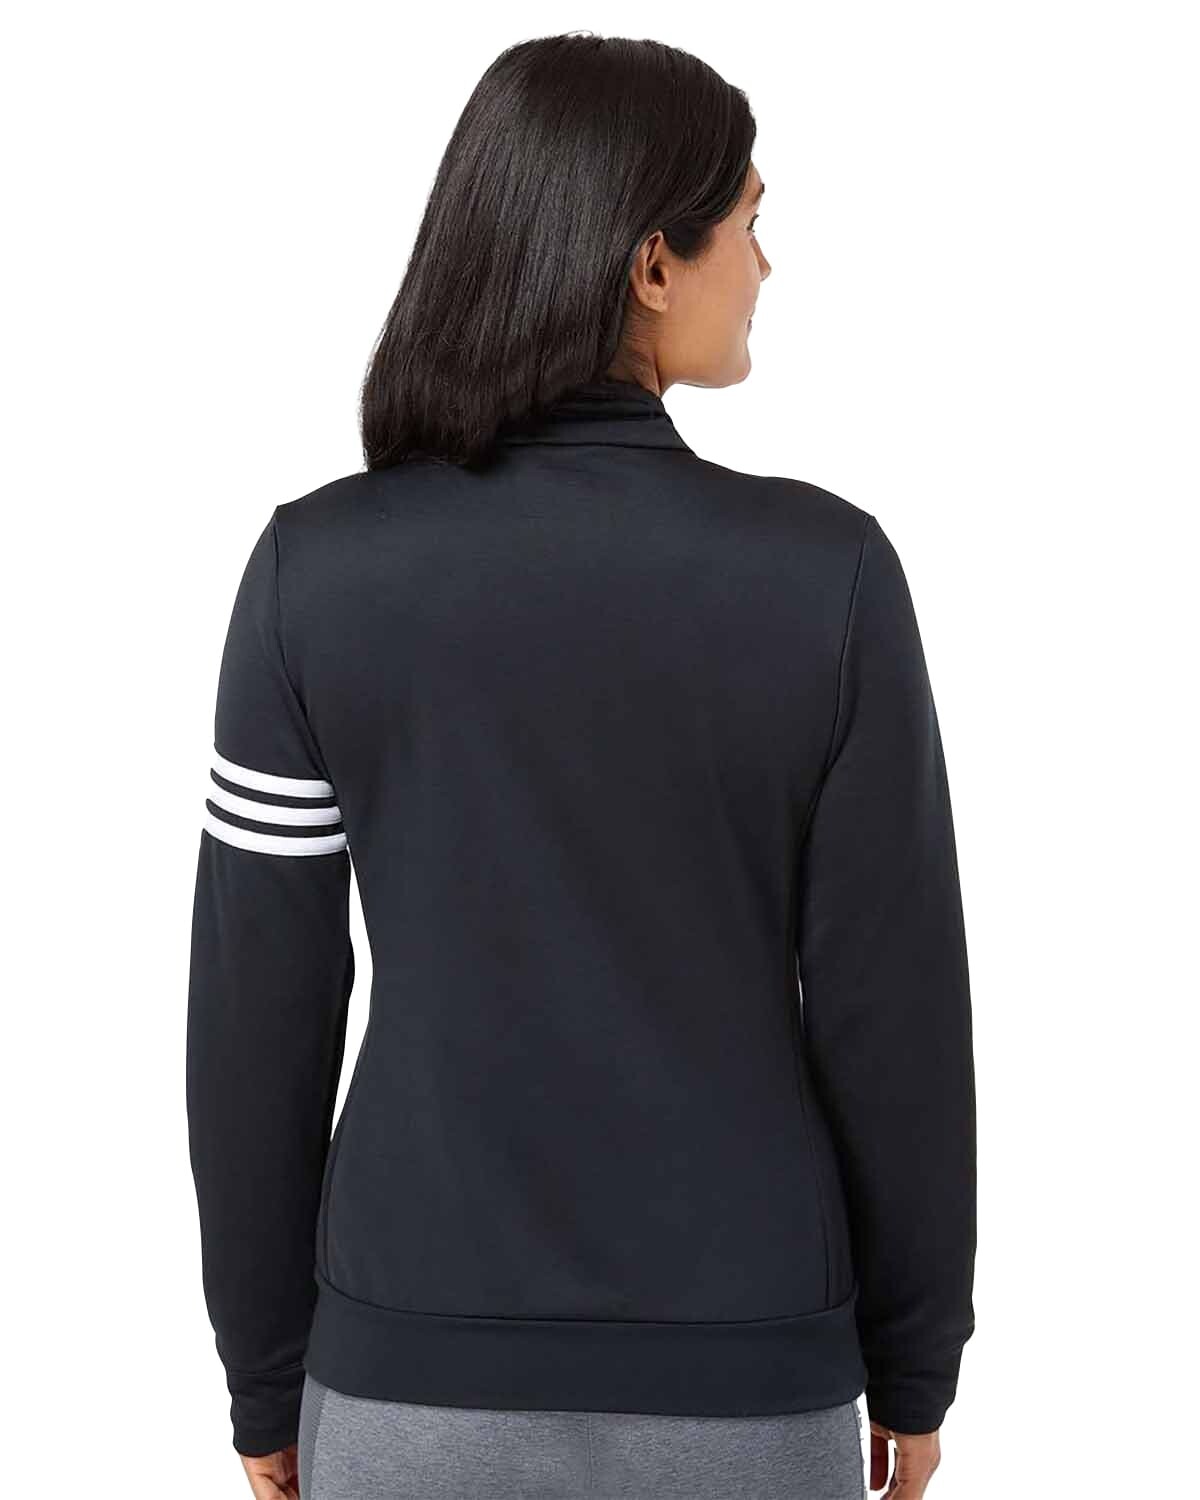 French Custom A191 3-Stripes Jacket business for Terry Full-Zip Adidas Golf Women